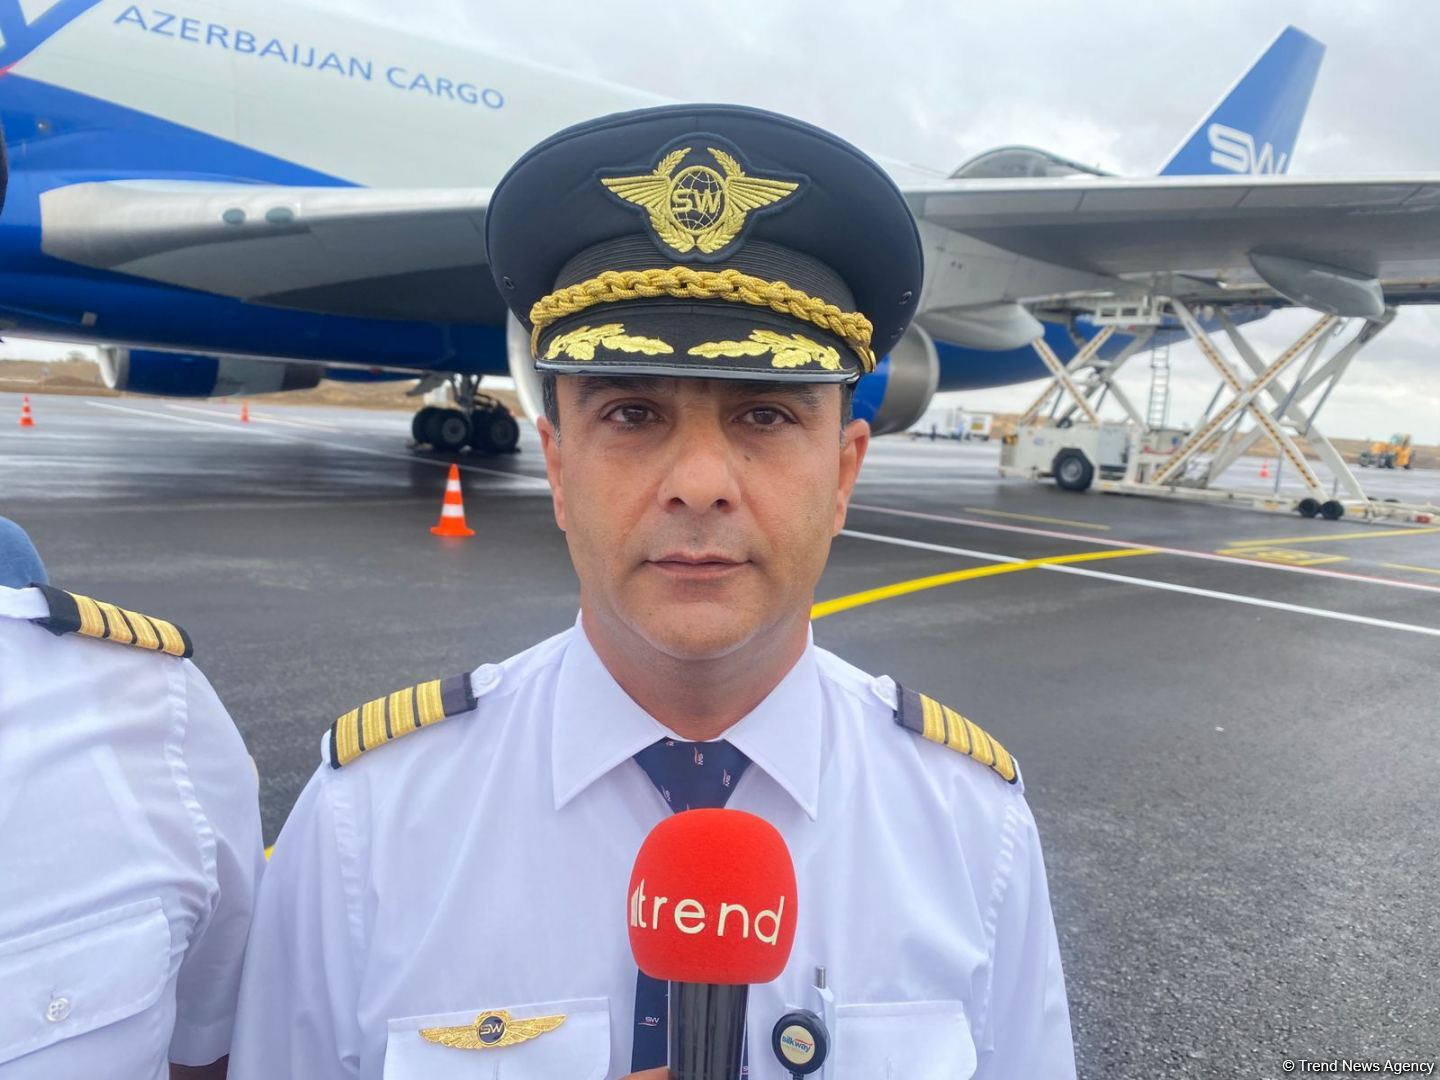 Flights to other airports in Karabakh region to surely be organized soon - Boeing aircraft captain